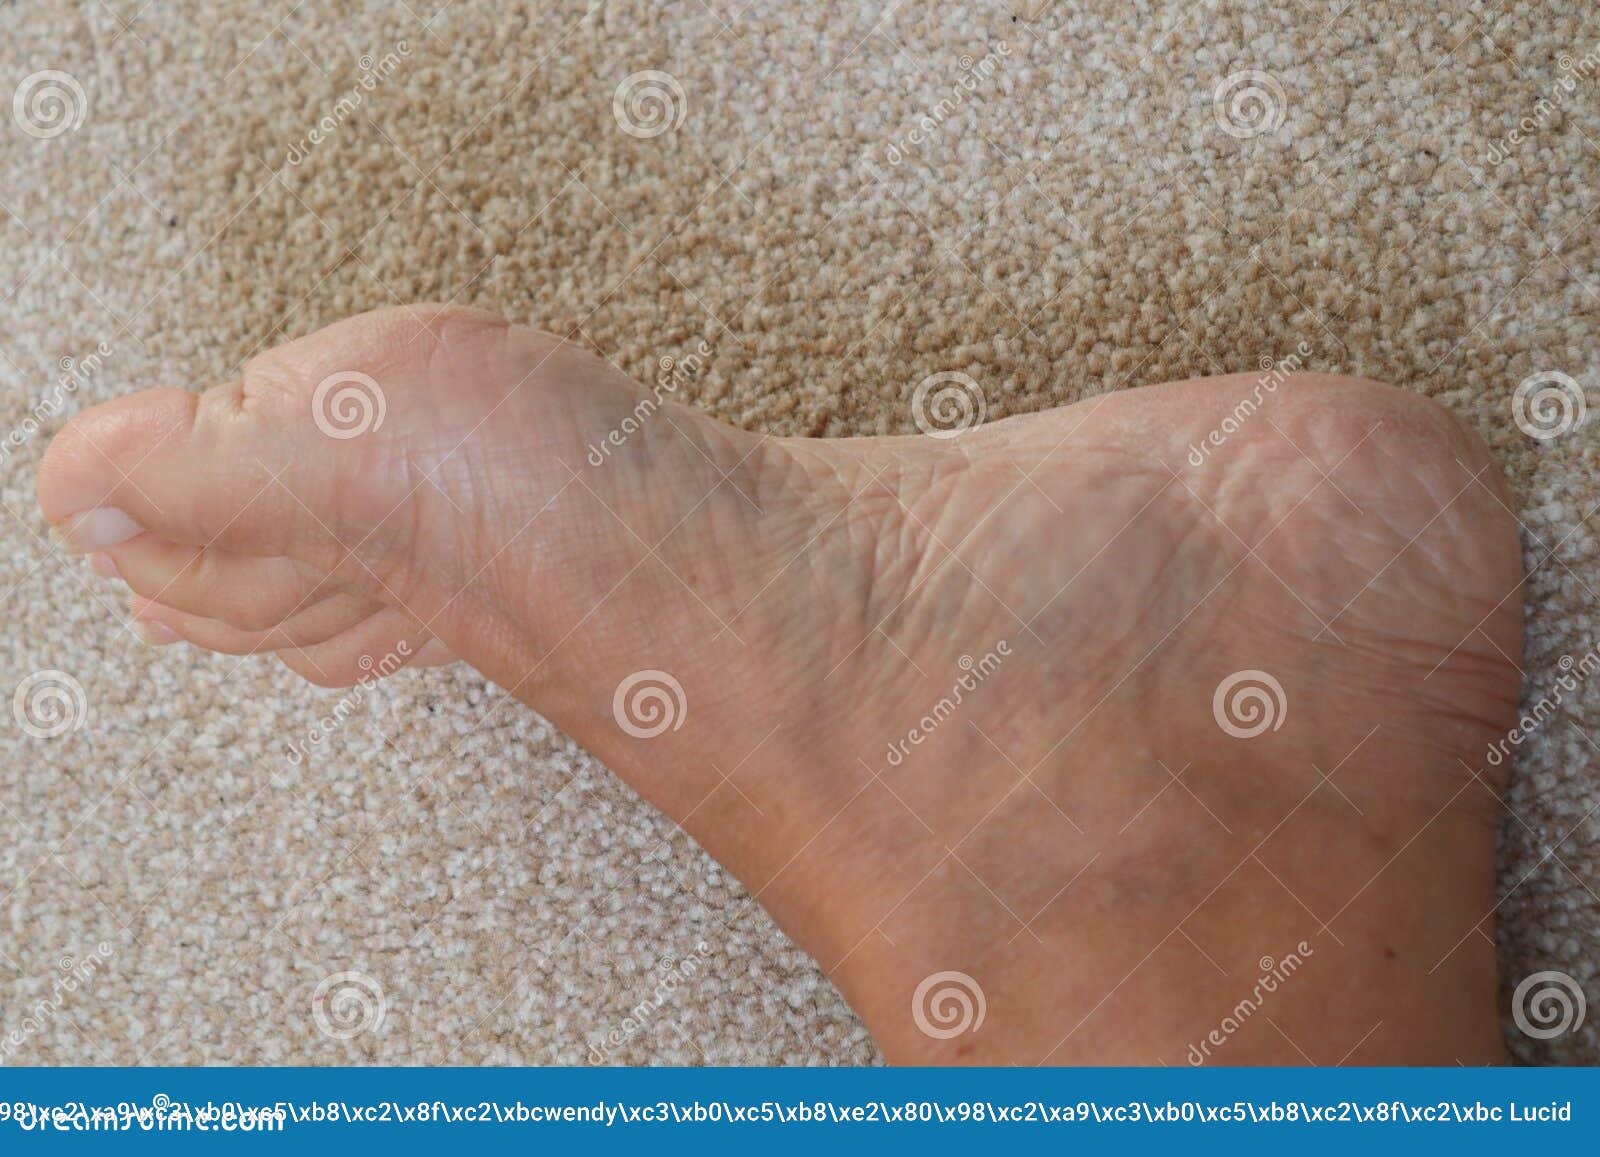 Sore Cracked Dry Skin On Feet Dry Dehydrated Feet Of A Lady Stock Image